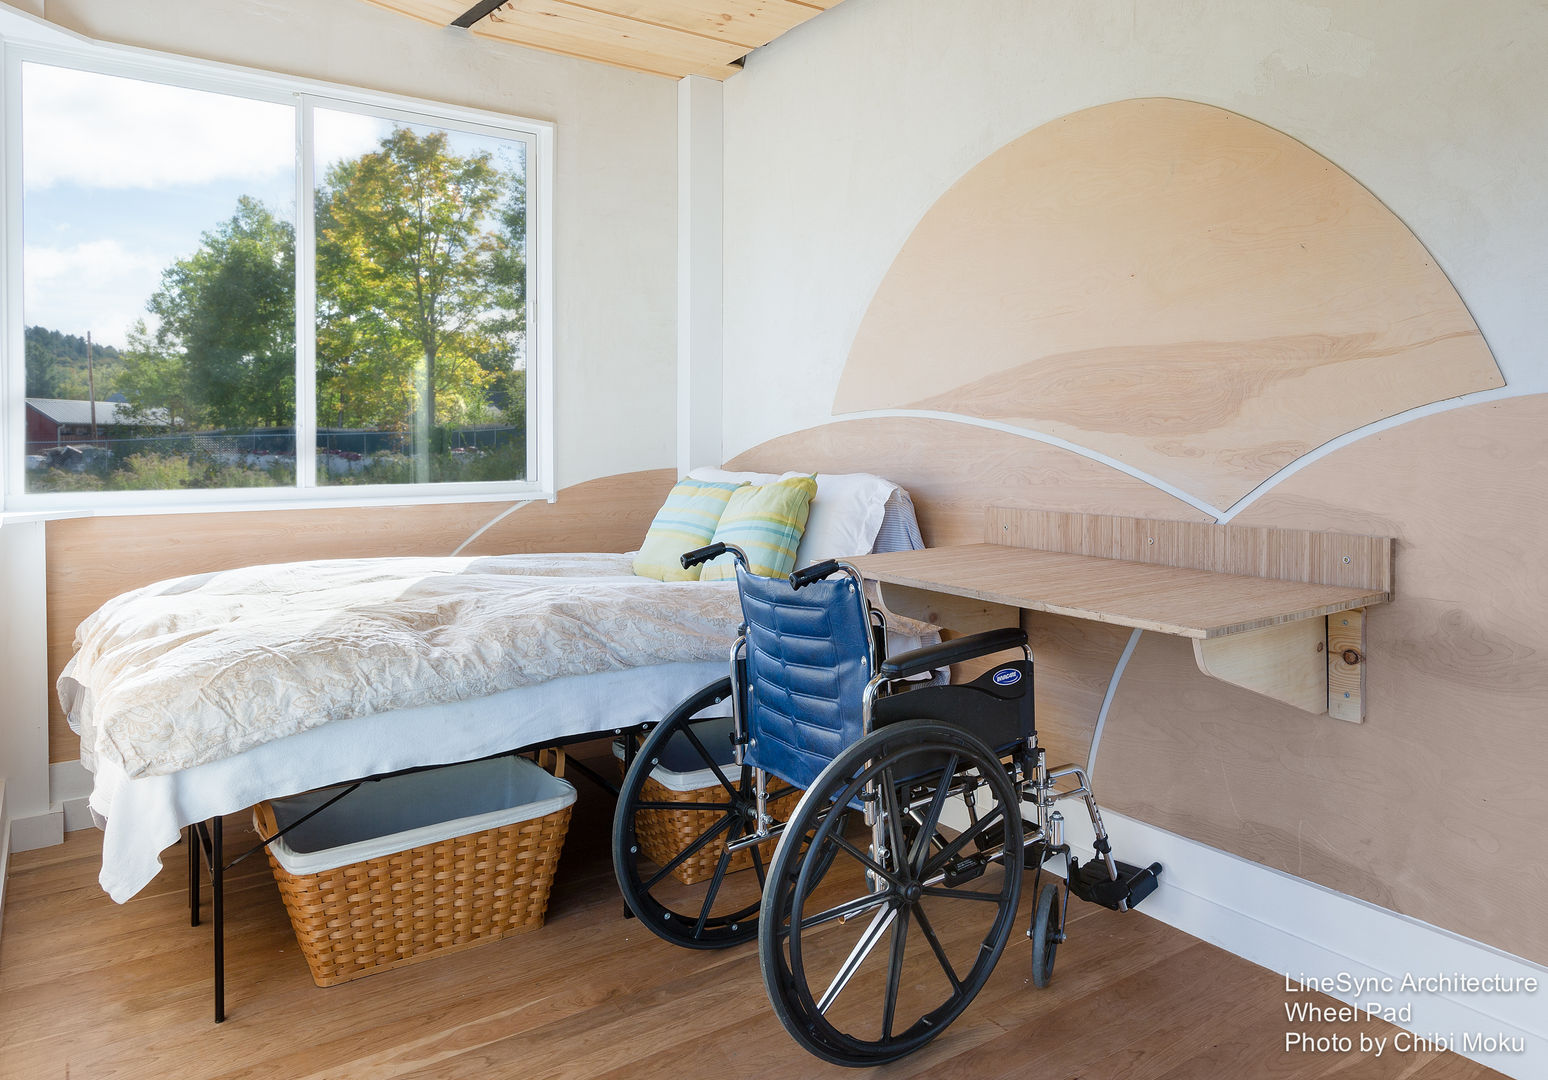 LineSync Architecture | Wheel Pad | Wilmington, VT, Chibi Moku Architectural Films Chibi Moku Architectural Films Modern style bedroom Engineered Wood Brown